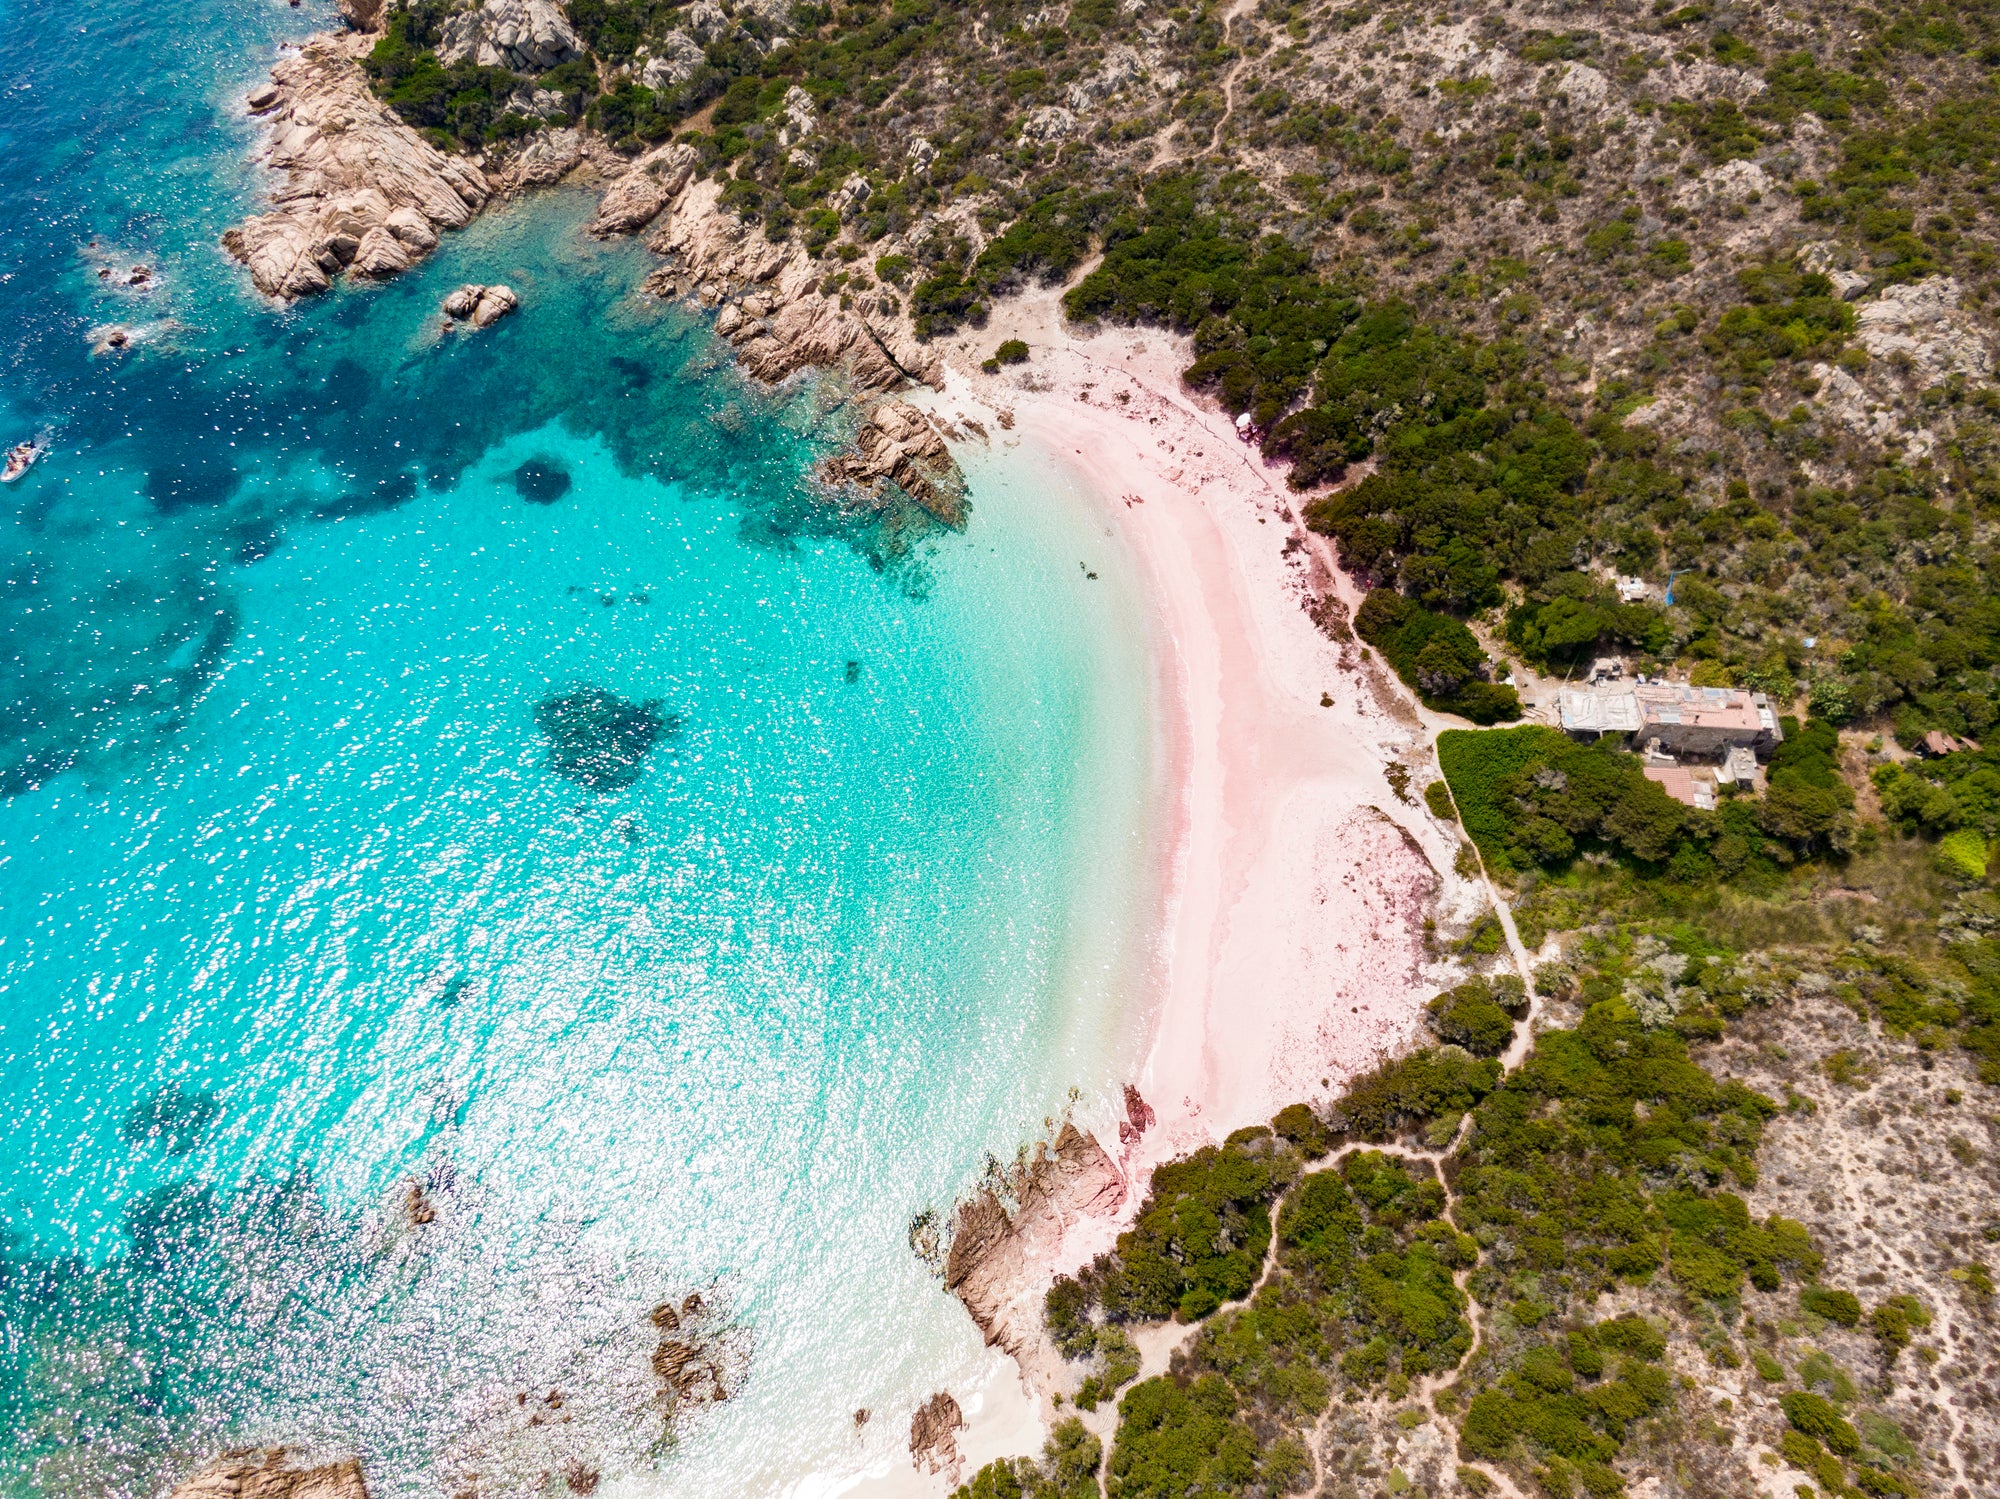 Spiaggia Rosa, or Pink Beach, is one of the most beautiful shorelines in the world